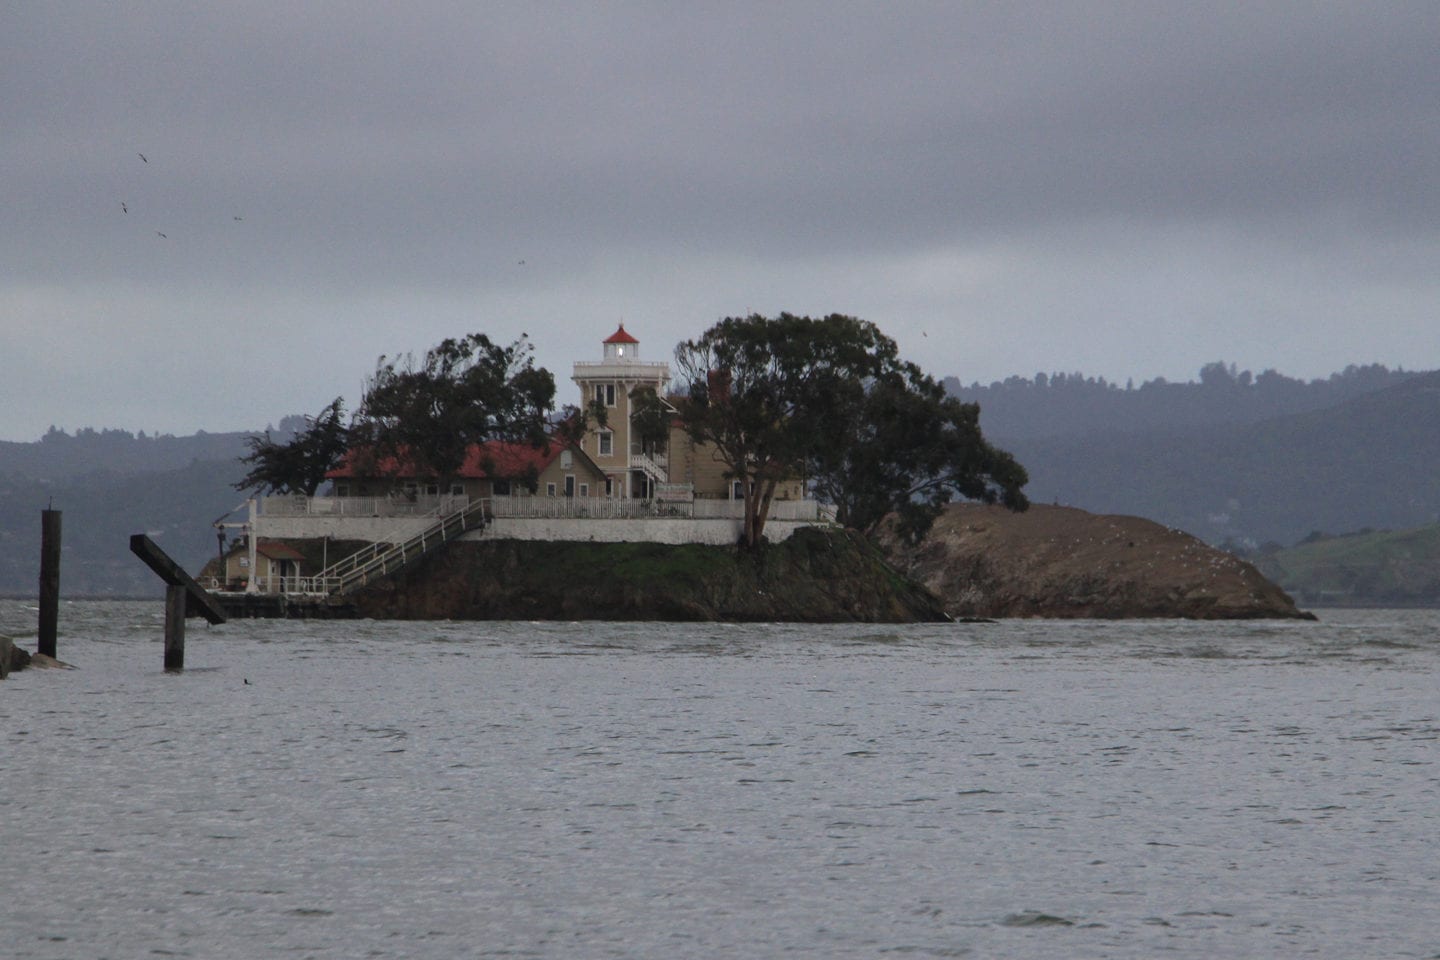 East Brother Island